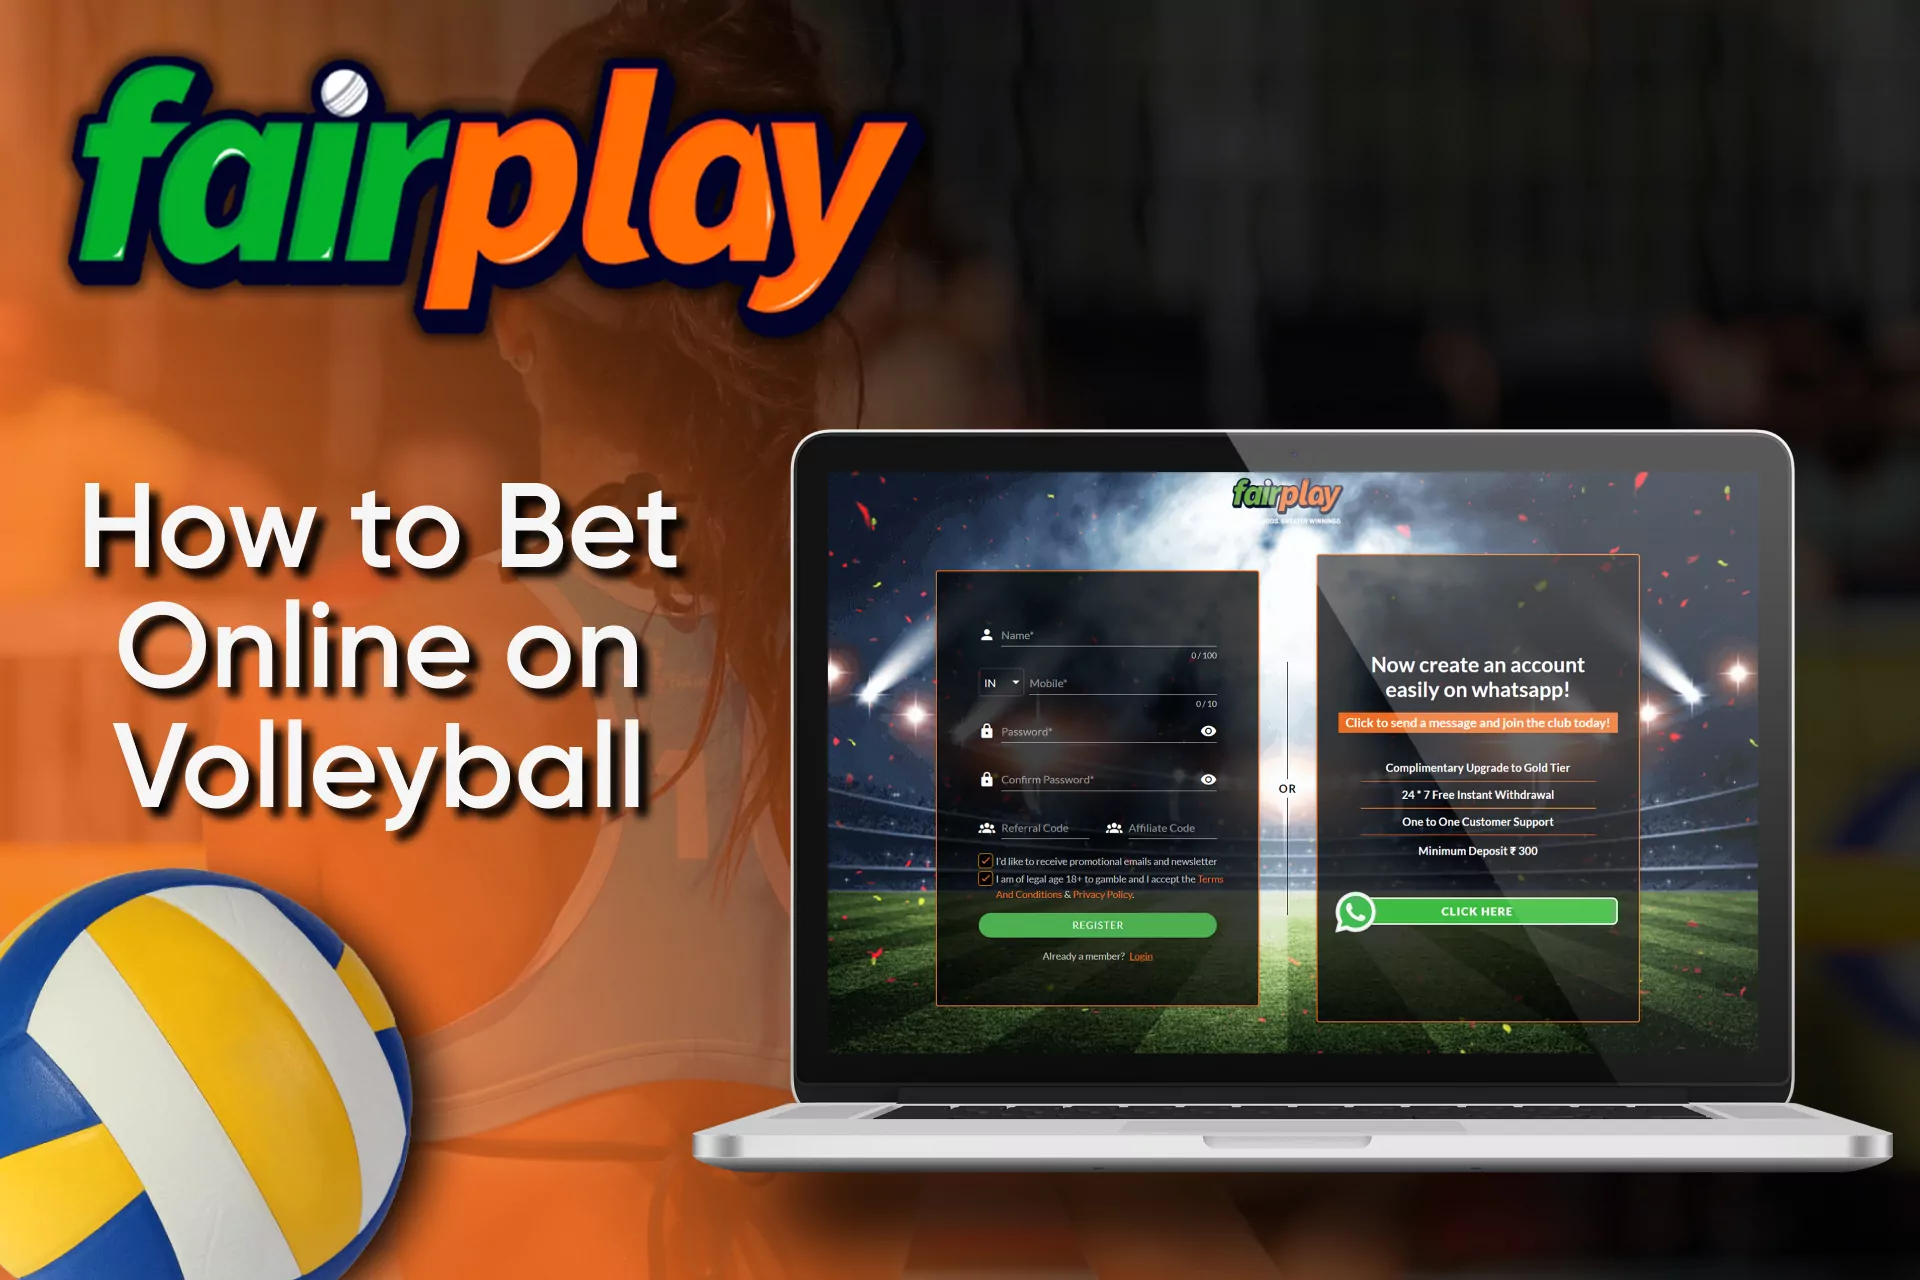 Create an account or log into Fairplay to start betting on volleyball.